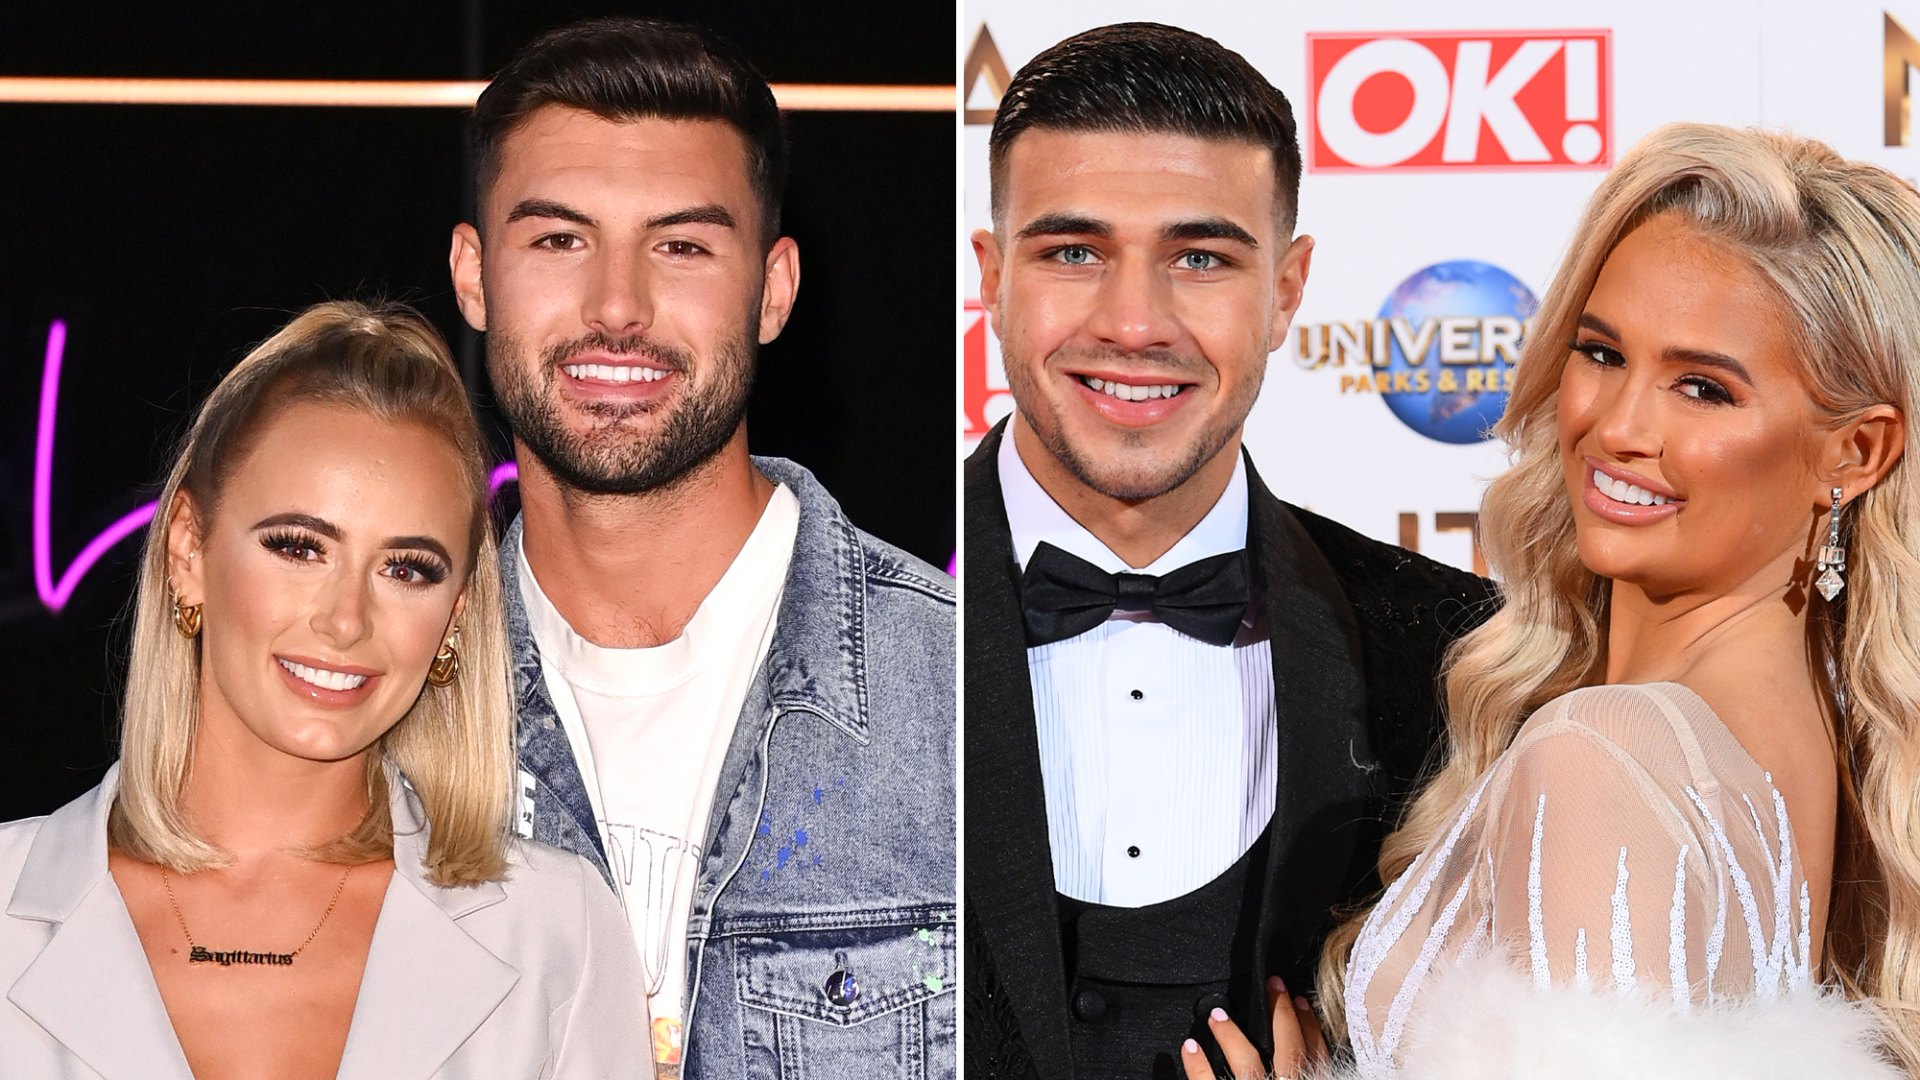 ‘Love Island U.S.A.’ Are Timmy and Zeta Still Together?